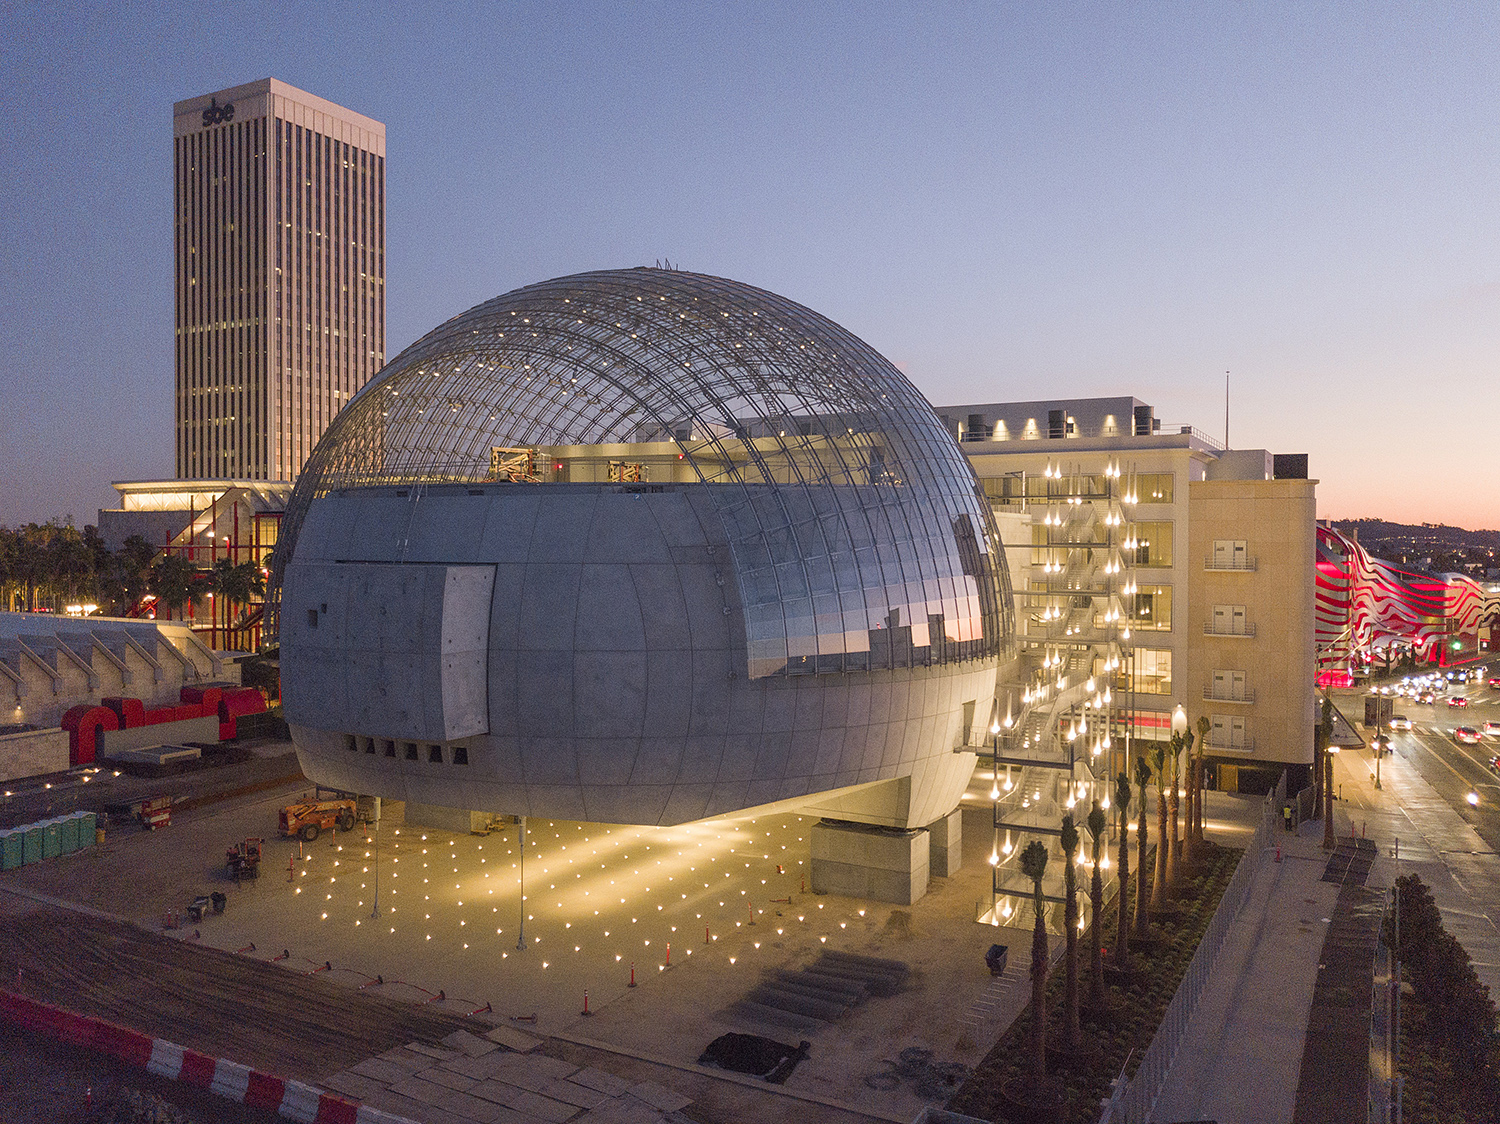 The Academy Museum of Motion Pictures was the 2022 Glass Magazine Award Winner of Project of the Year, as well as Best Feat of Engineering. Knippers Helbig Advanced Engineering nominated the project.